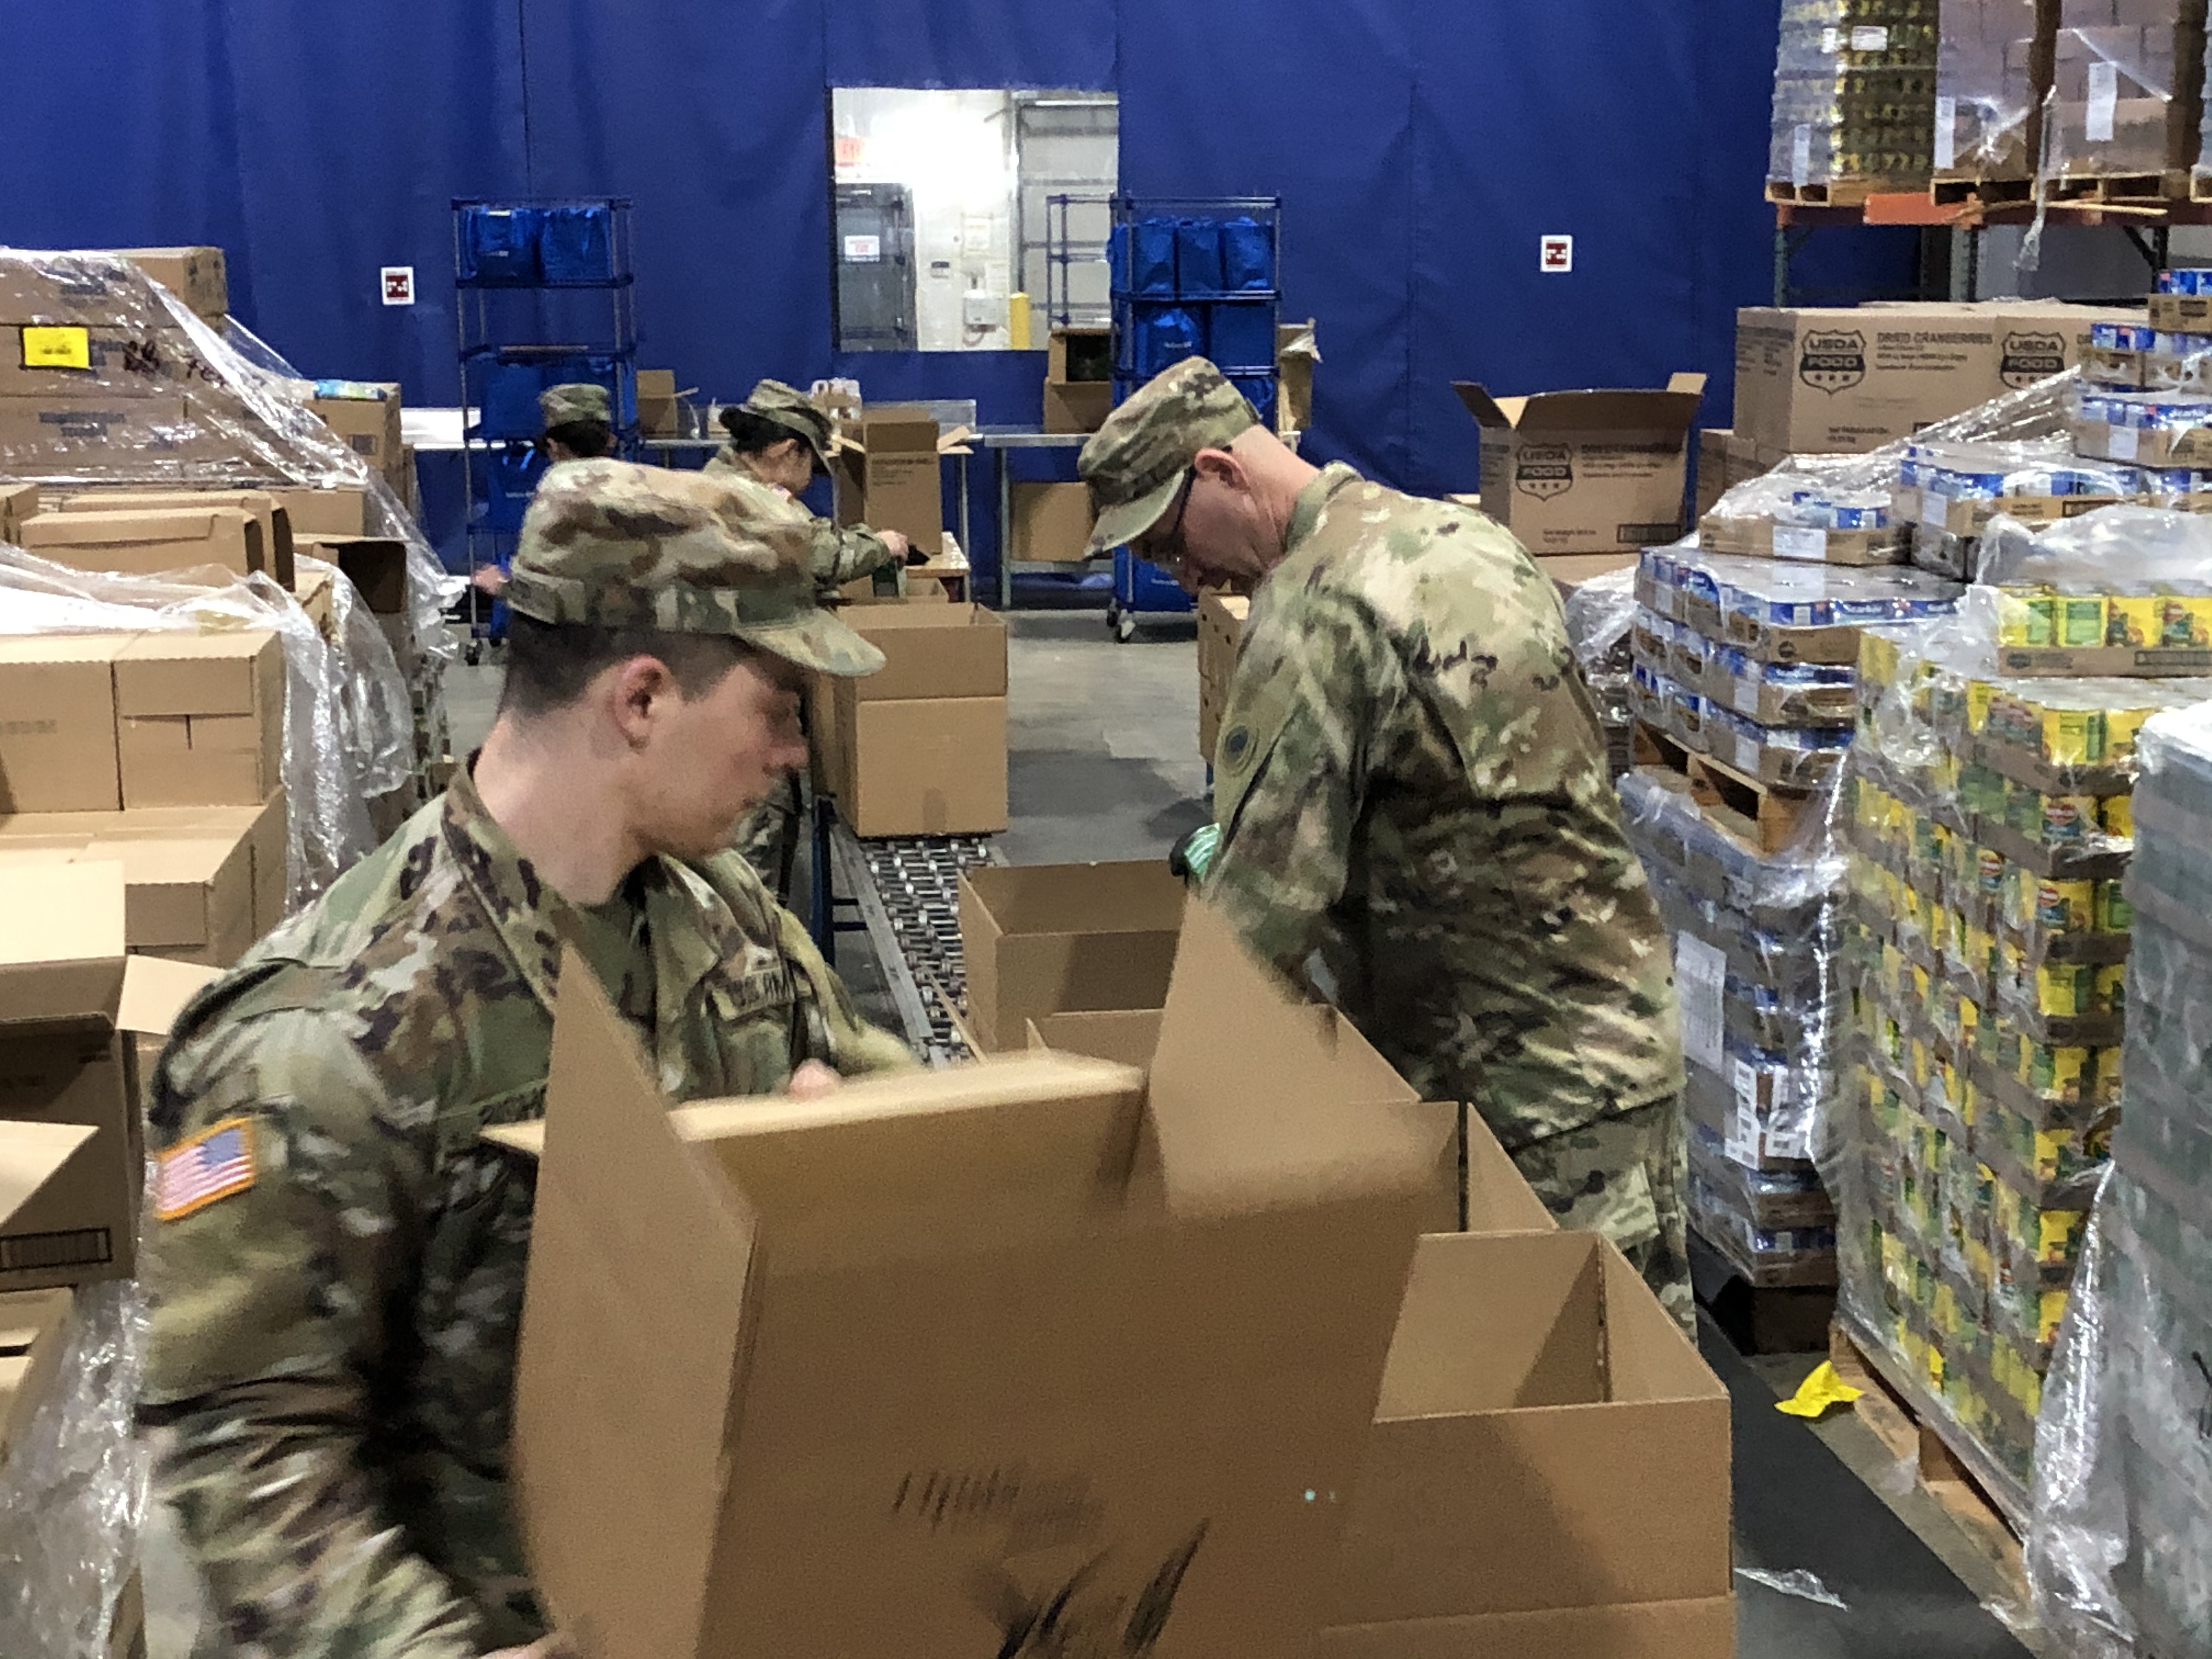 Soldiers load boxes.